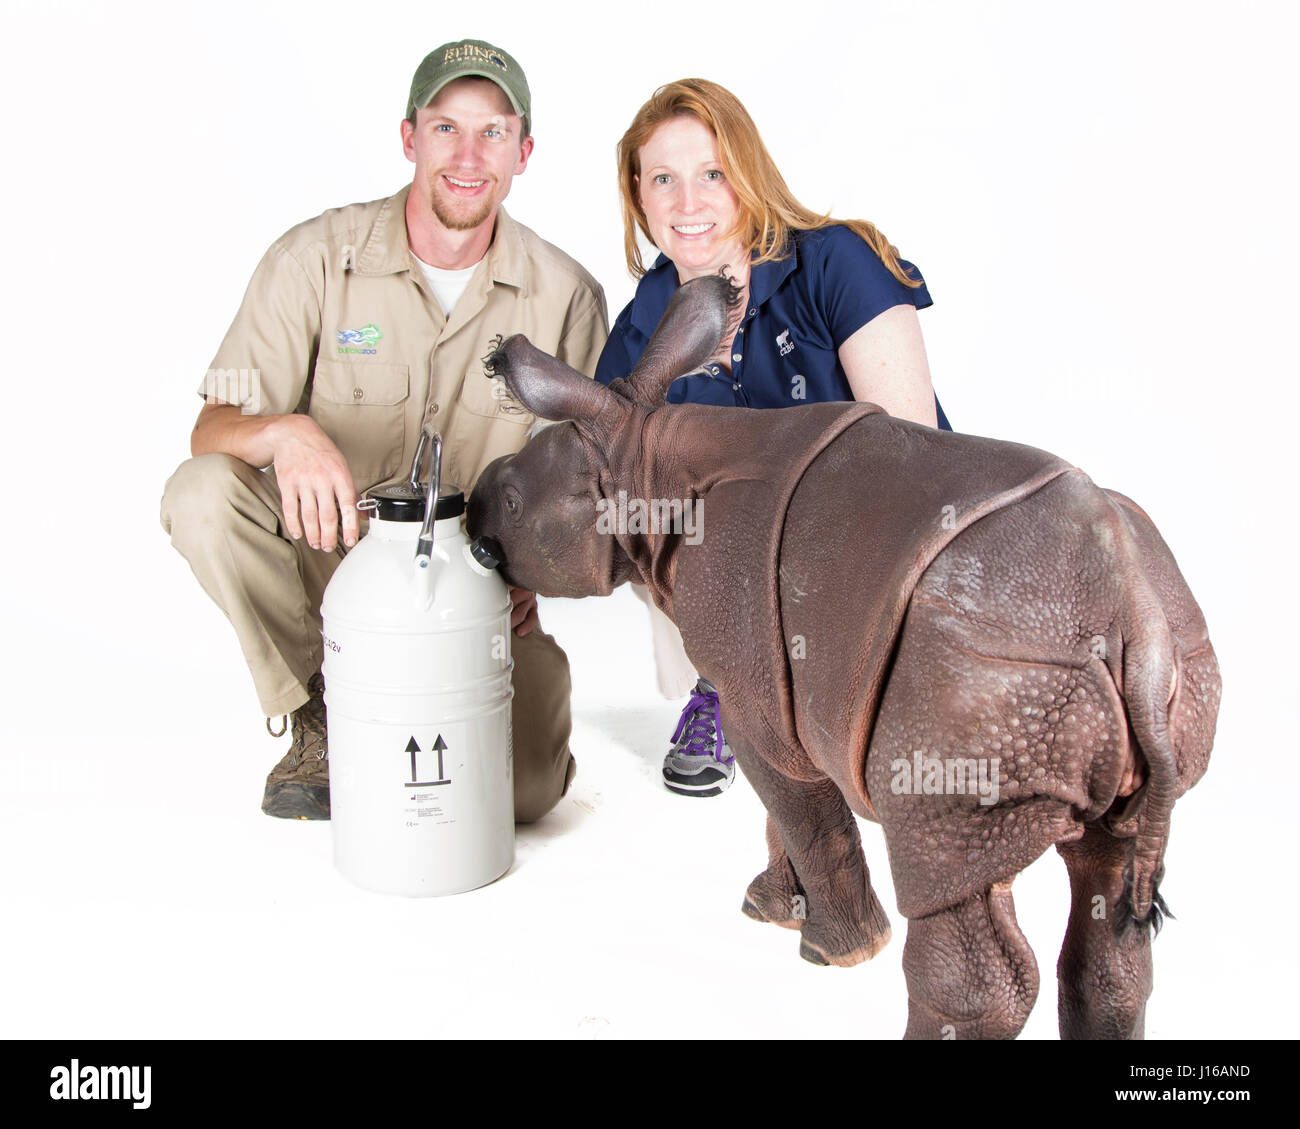 BUFFALO ZOO, USA: Zookeeper Joe Hauser and scientist Dr Monica Snoops pose next to Monica the baby rhino and an artificial insemination unit. THE WORLD’S FIRST test-tube rhino whose father died a DECADE ago is a real cutie. This two-week old female Indian rhino calf’s father “Jimmy” died in 2004 and baby rhino Monica was only born thanks to the sperm being frozen and used to impregnate her mother. Staff at Buffalo Zoo in the US managed to use artificial insemination techniques to bring one more of this rare species into the world. Only 2,500 Indian rhinos remain alive in the wild. Mother Tashi Stock Photo